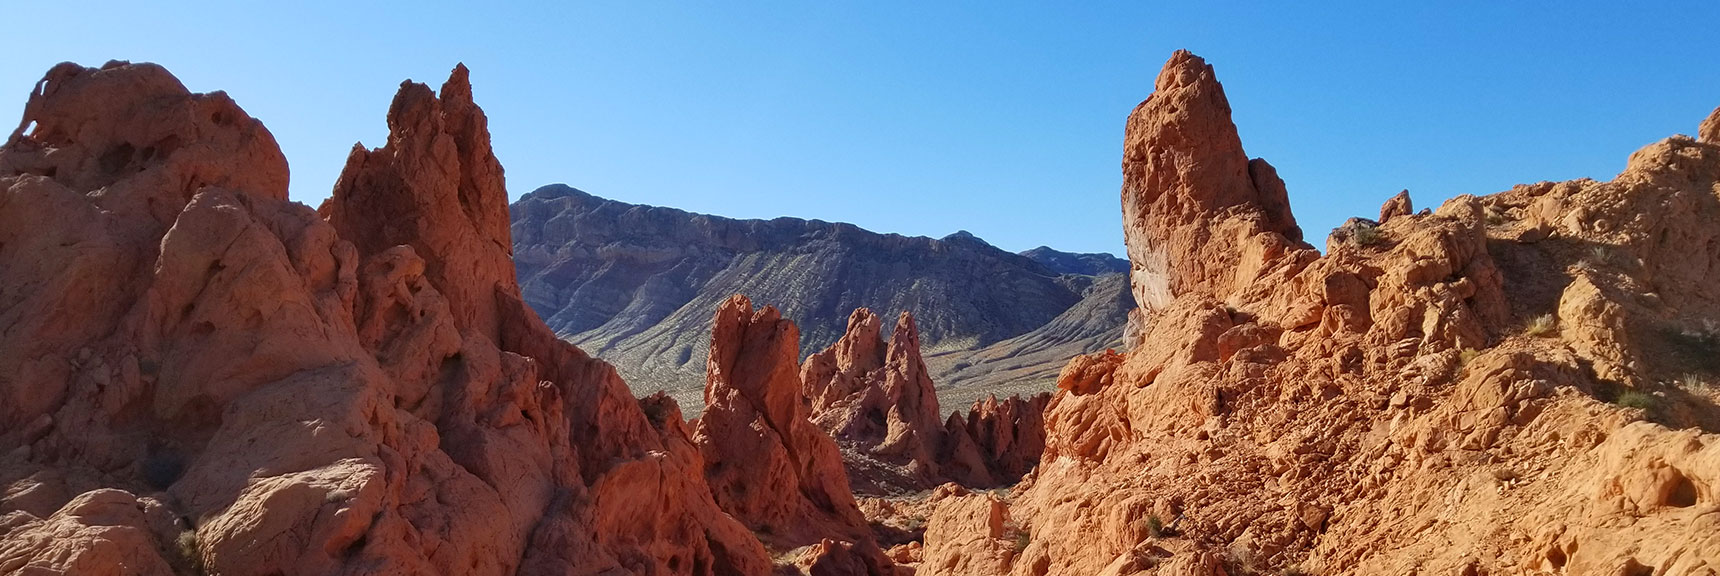 Looking Back on the Pinnacles of Pinnacles Loop Trail in Valley of Fire State Park, Nevada